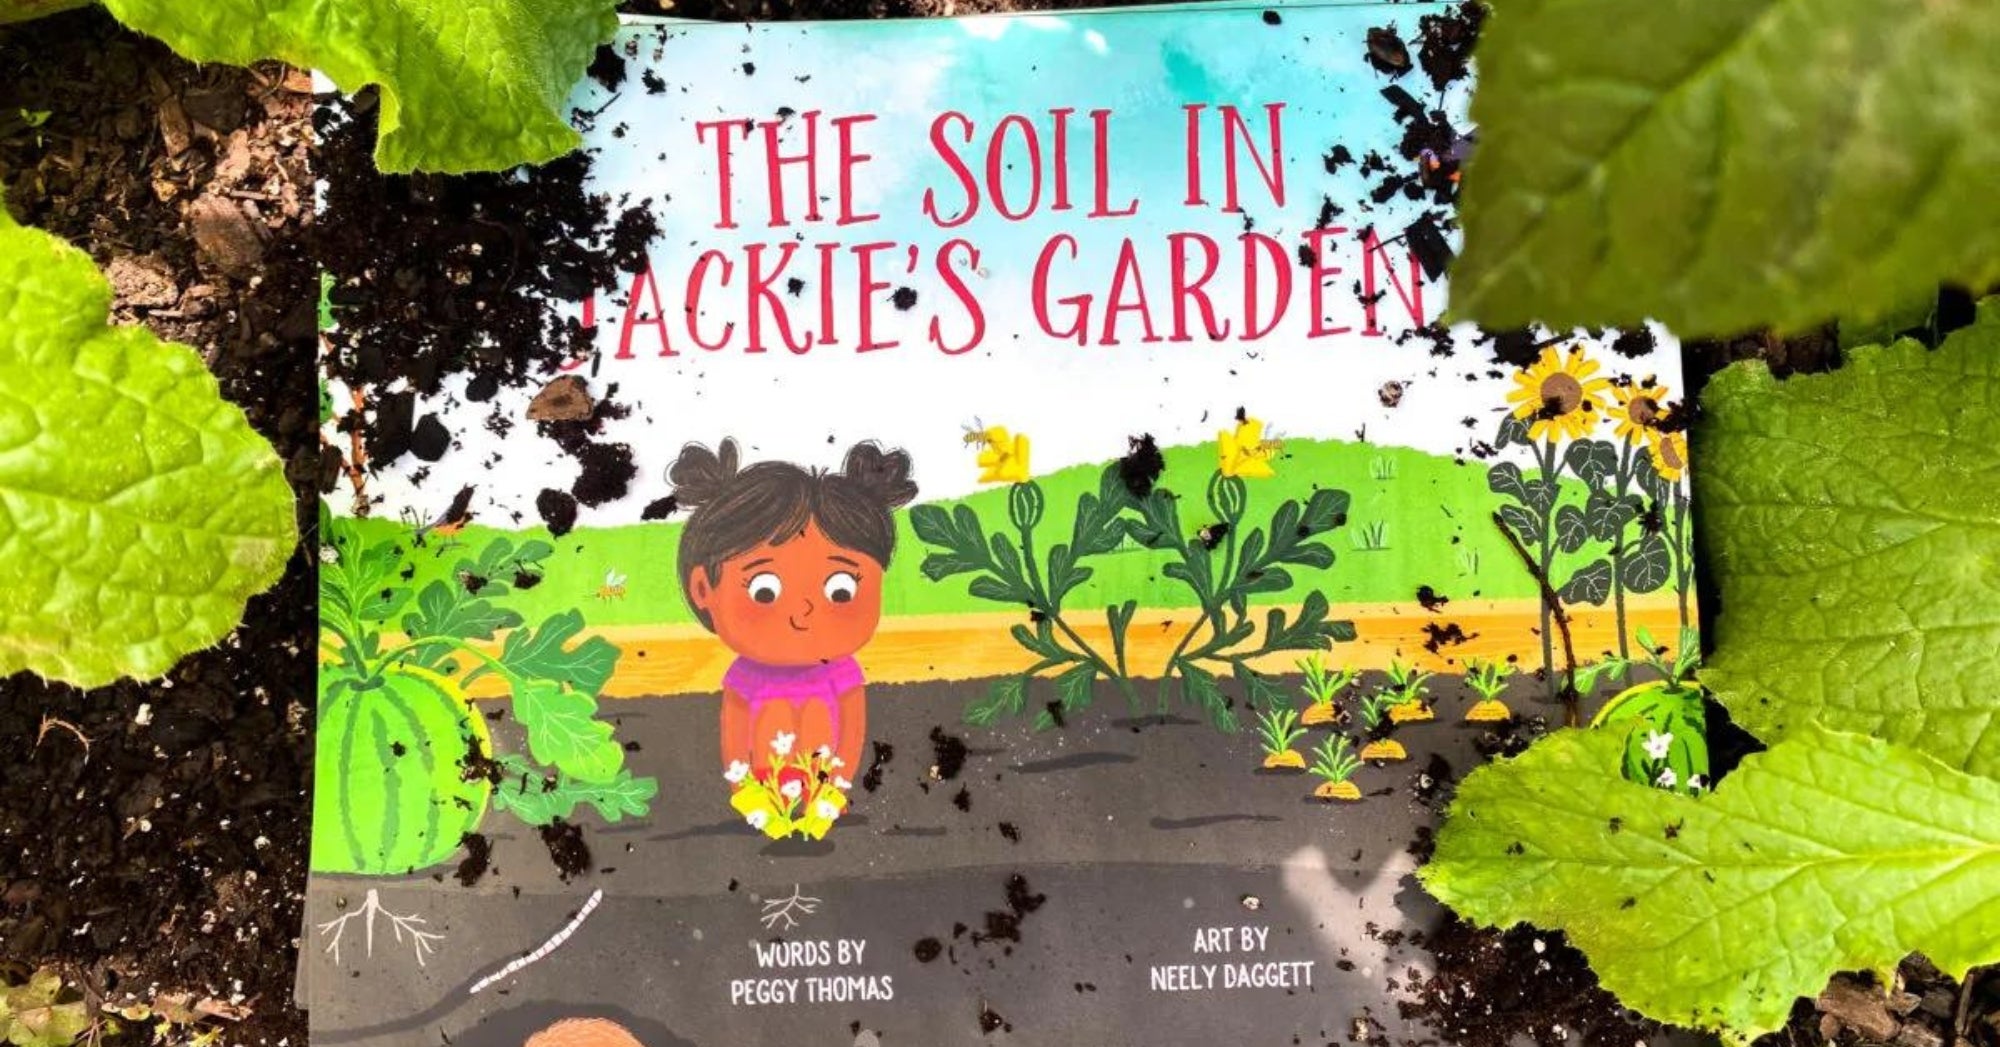 Farm Bureau introduces children to soil science with a new book